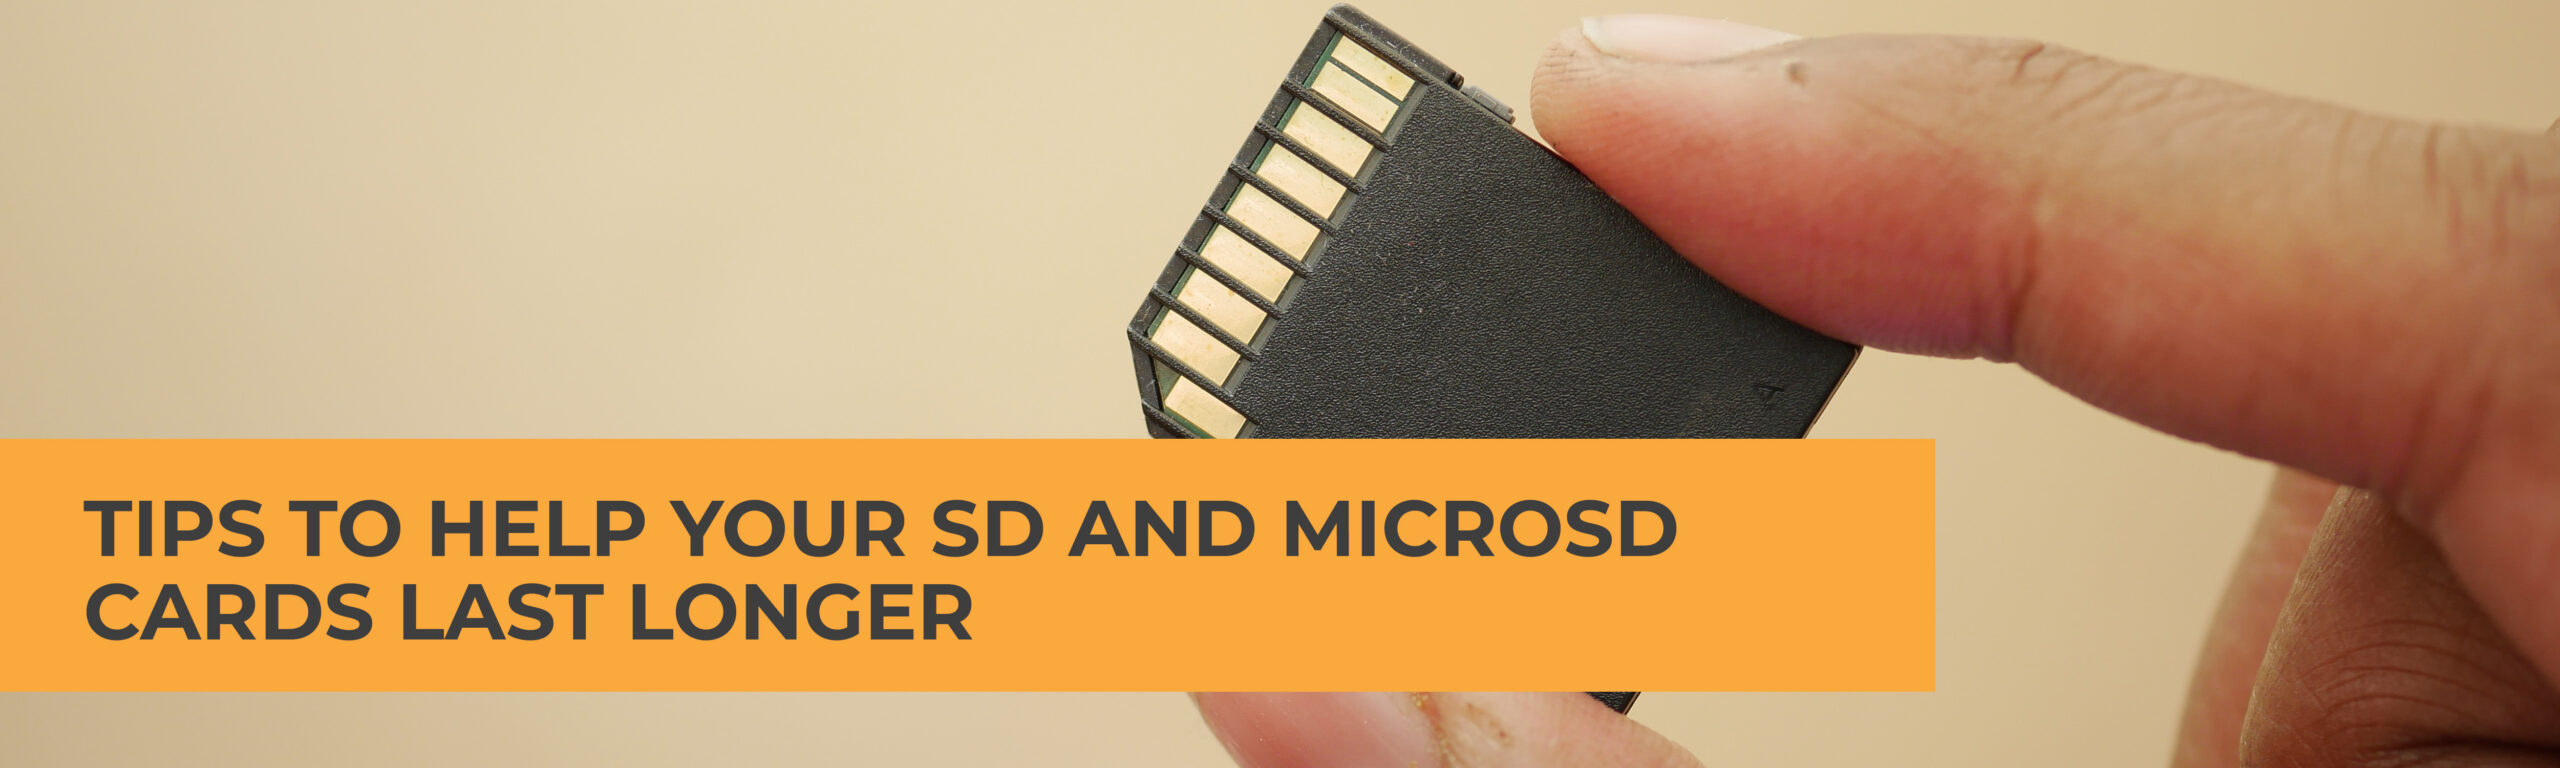 Tips to Help Your SD and microSD Cards Last Longer